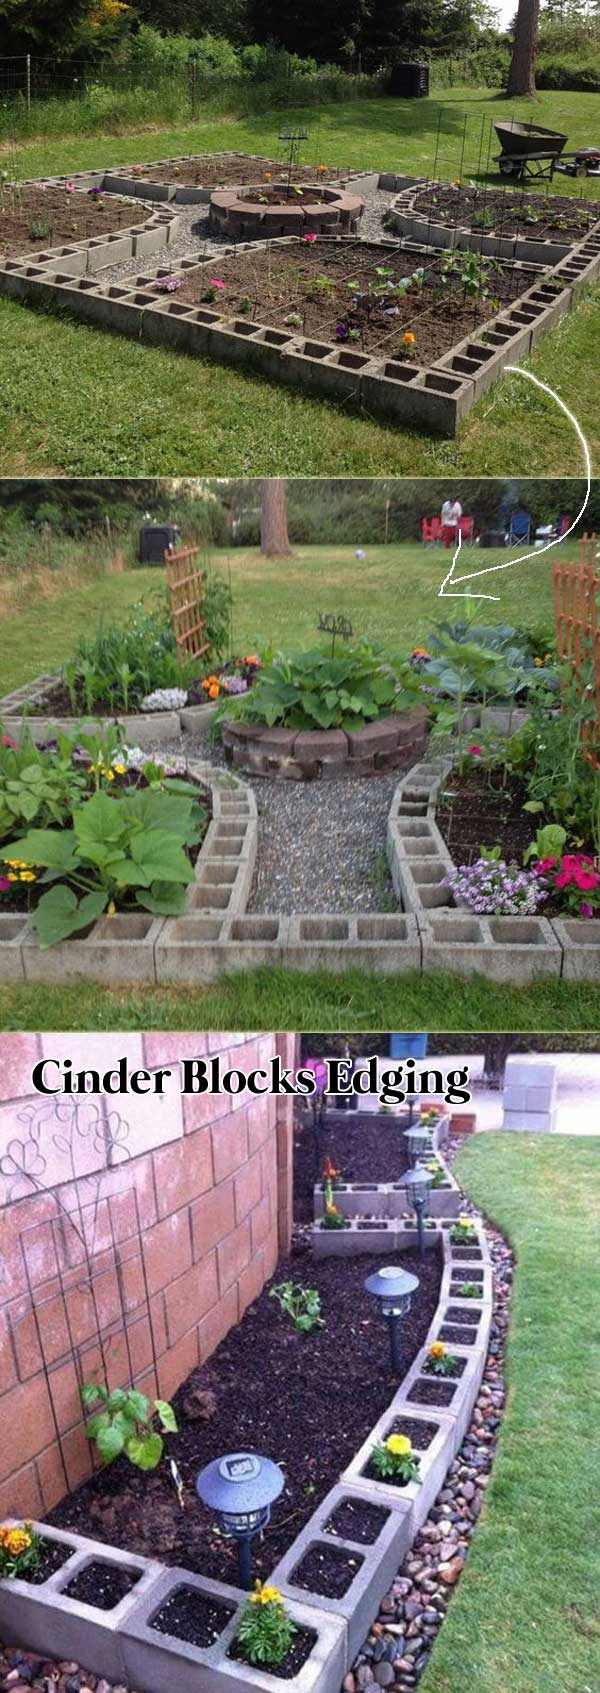 Create Awesome Garden Edging To Improve Your Curb Appeal